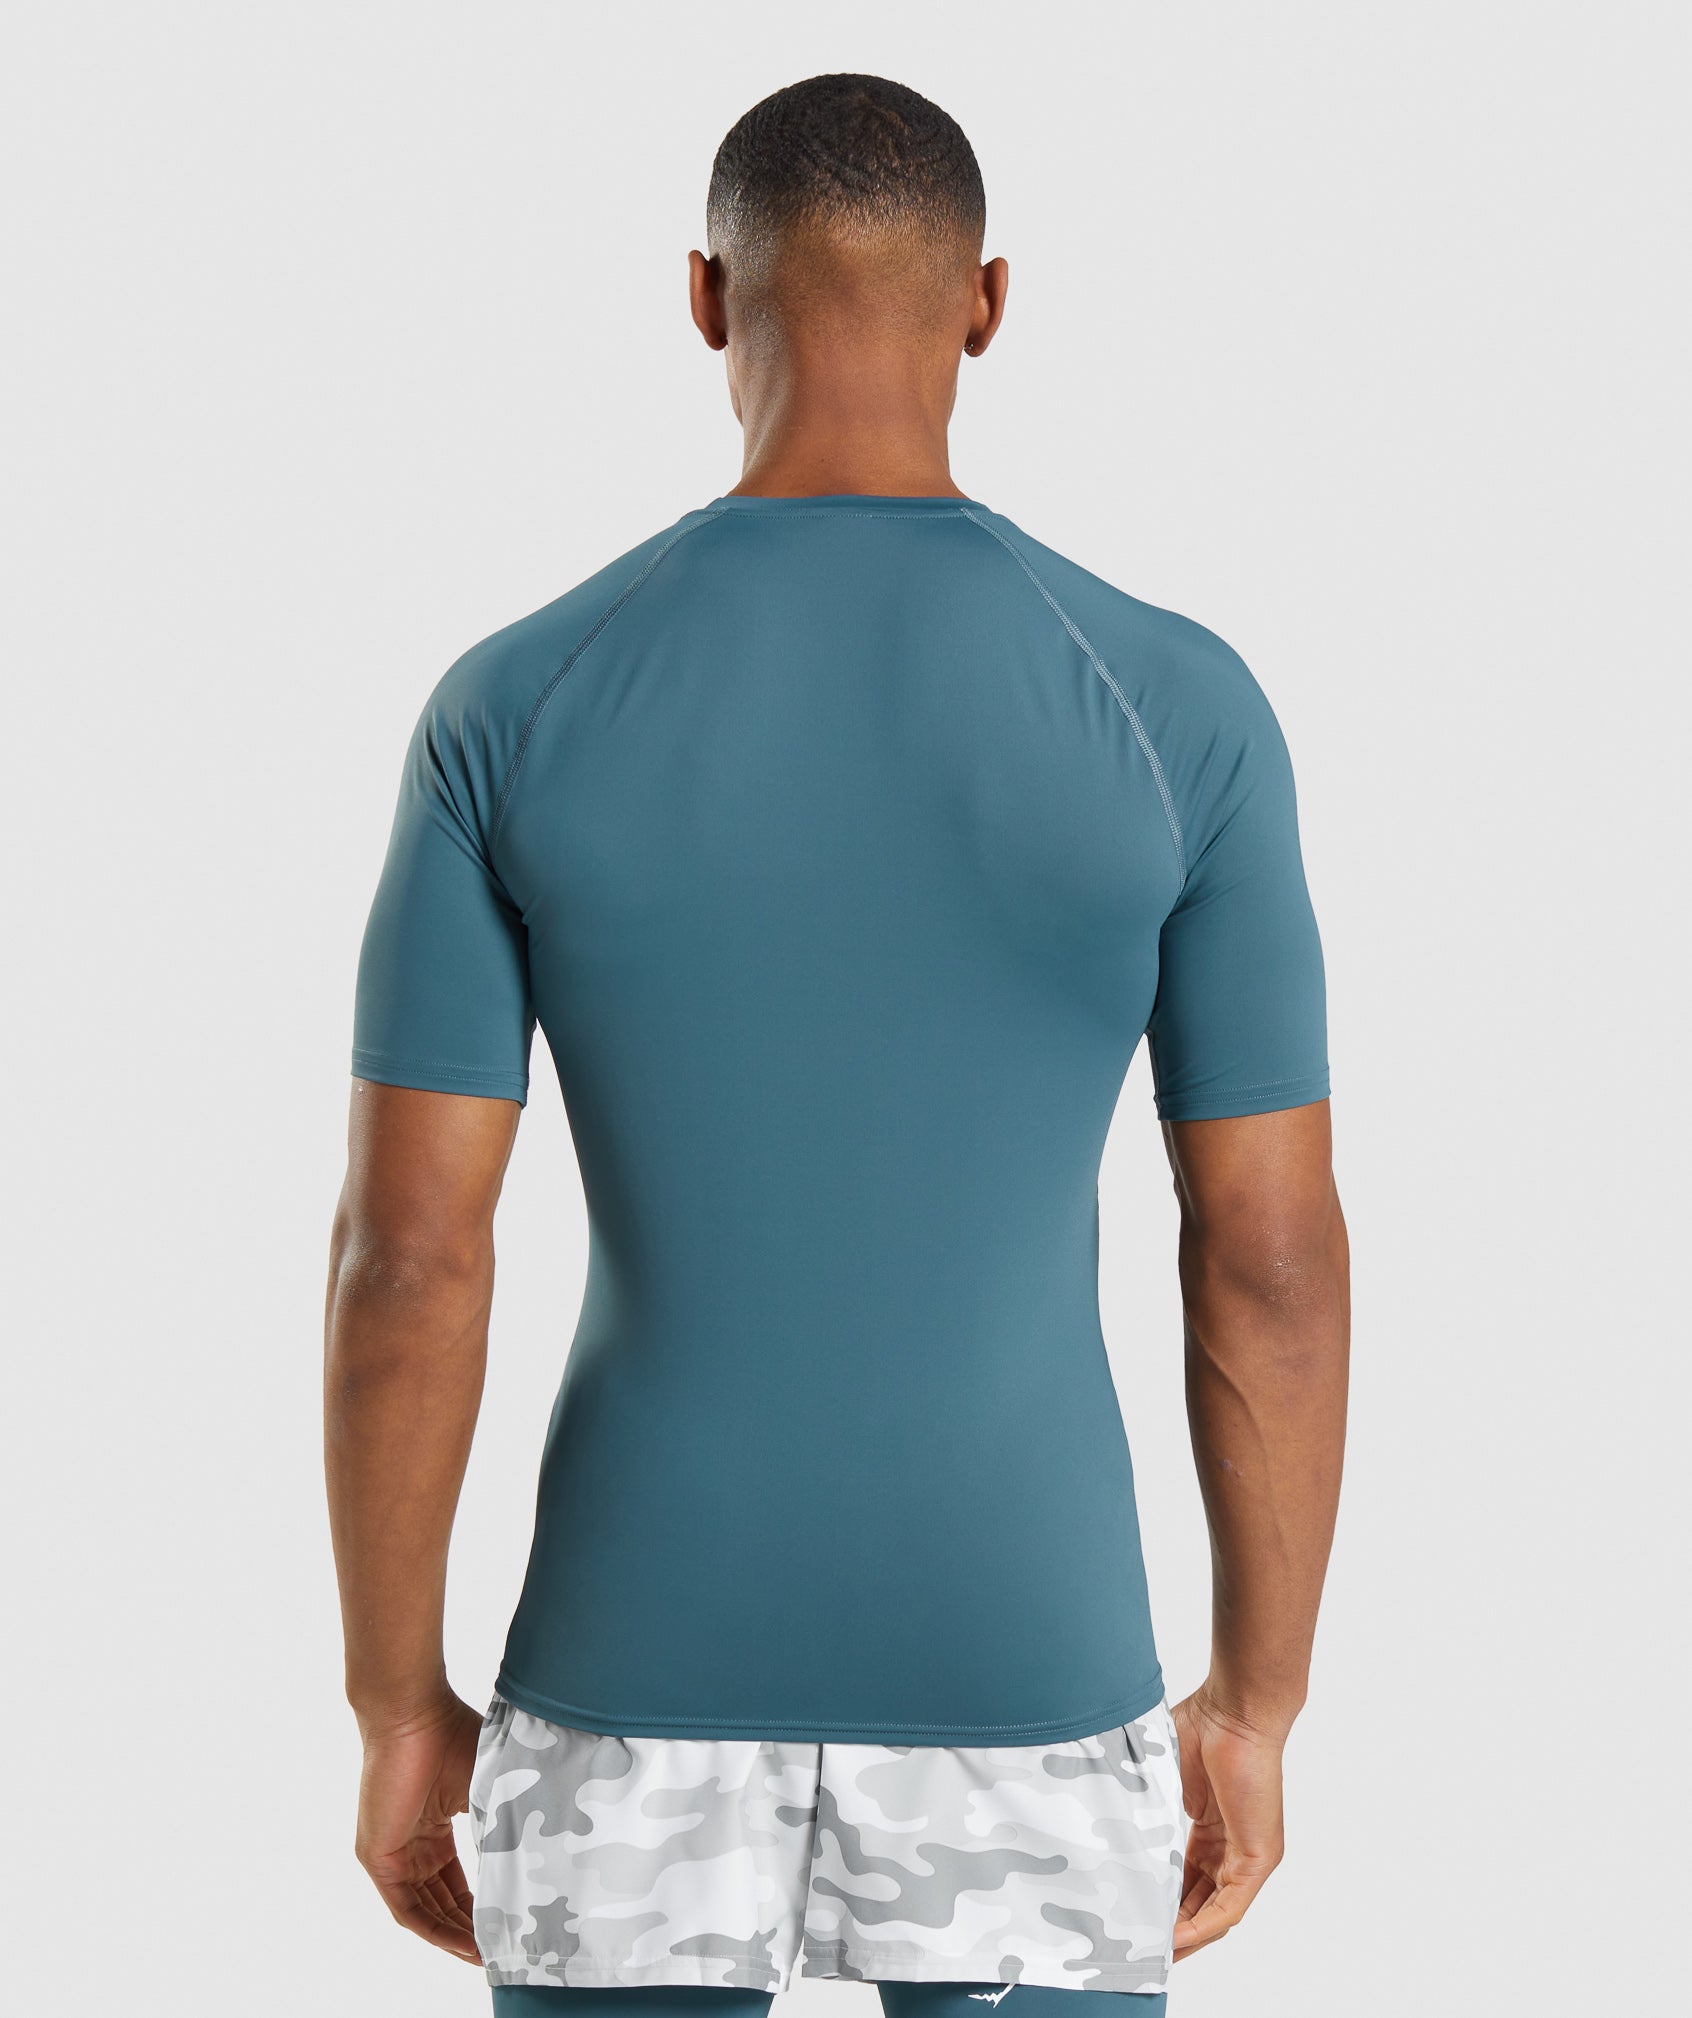 Element Baselayer T-Shirt in Tuscan Teal - view 2